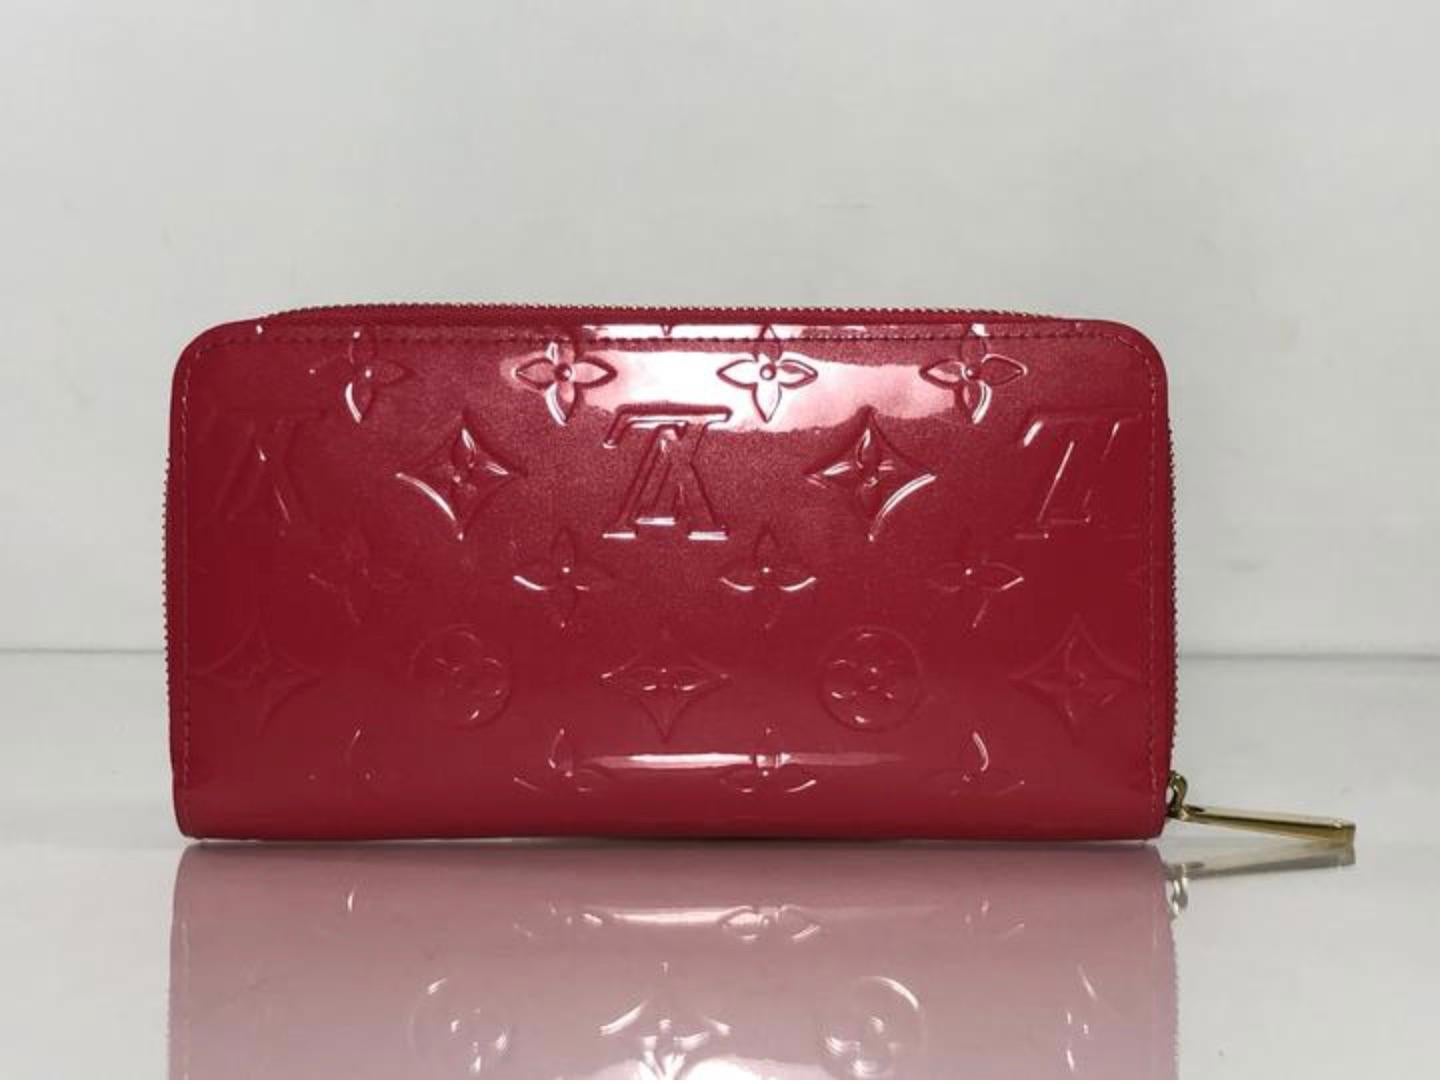 Louis Vuitton Vernis Zippy Wallet in Pink In Excellent Condition For Sale In Saint Charles, IL